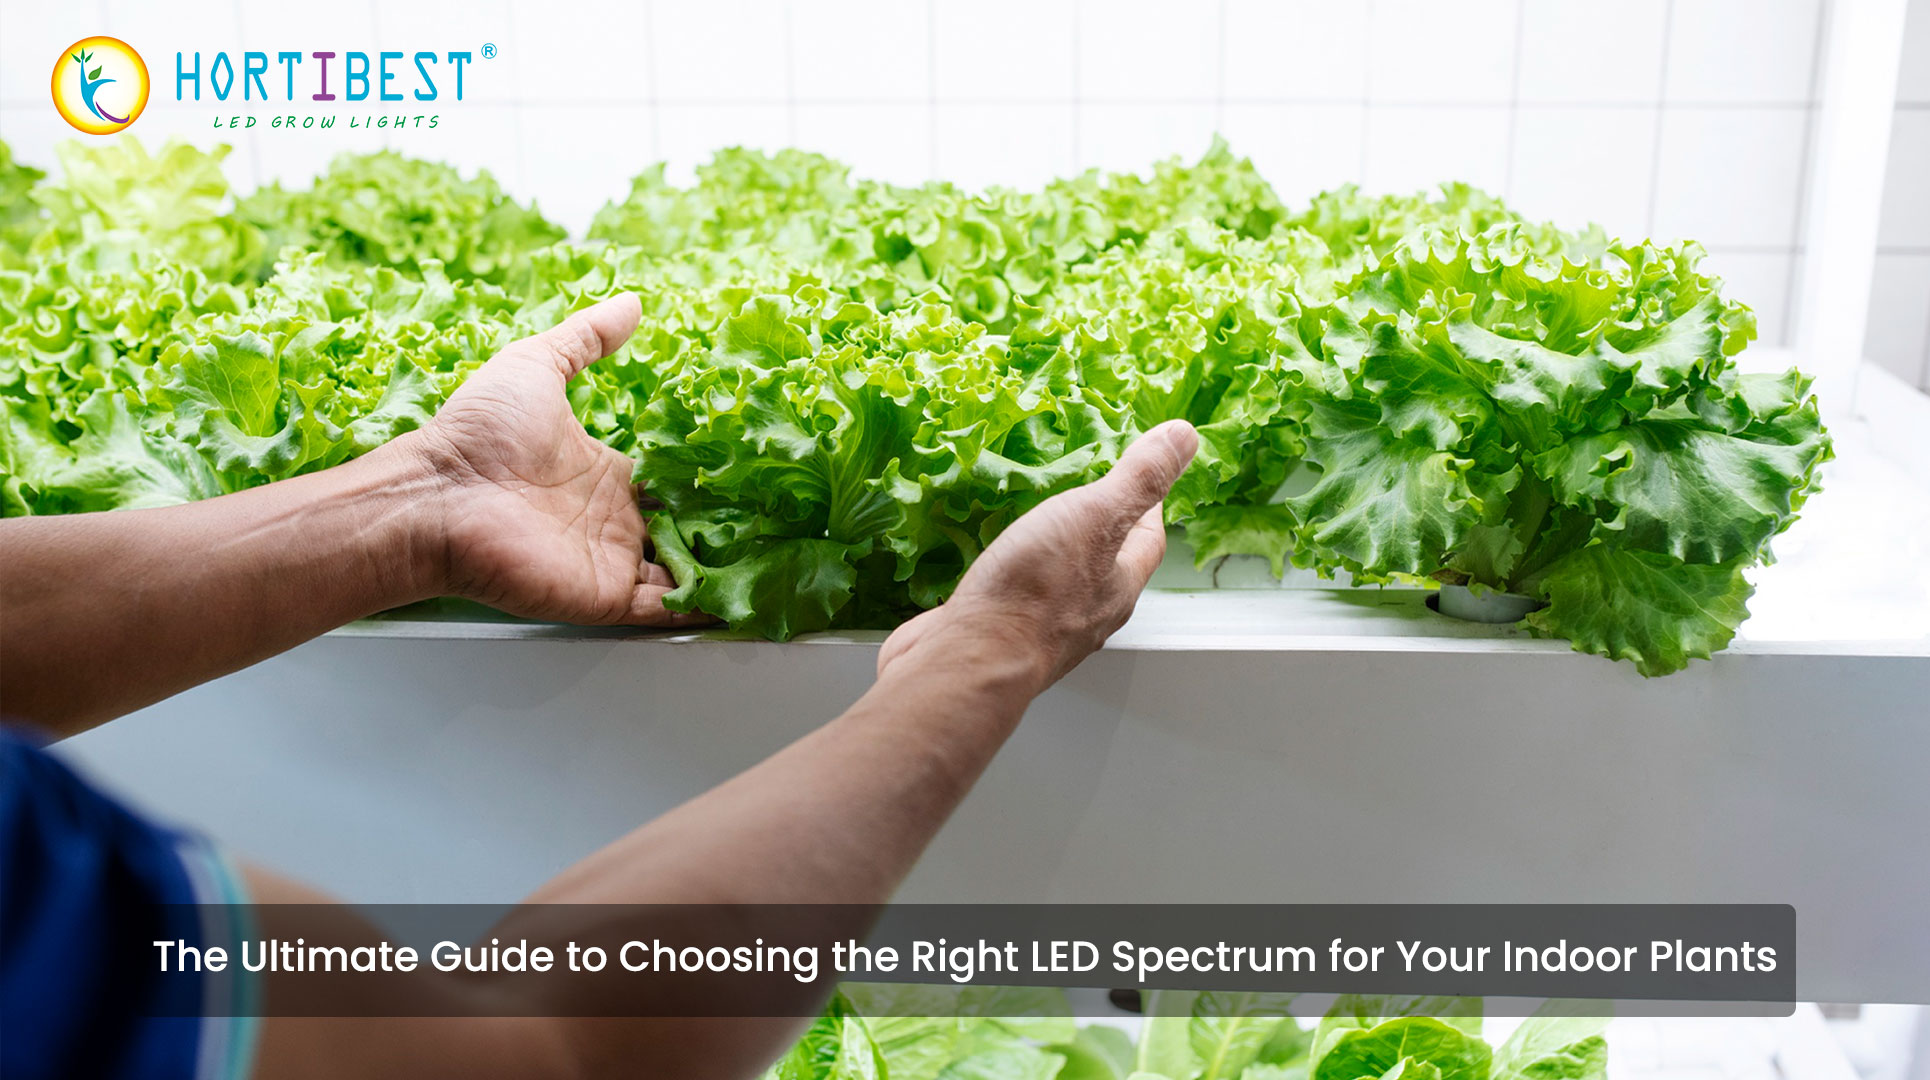 The Ultimate Guide to Choosing the Right LED Spectrum for Your Indoor Plants